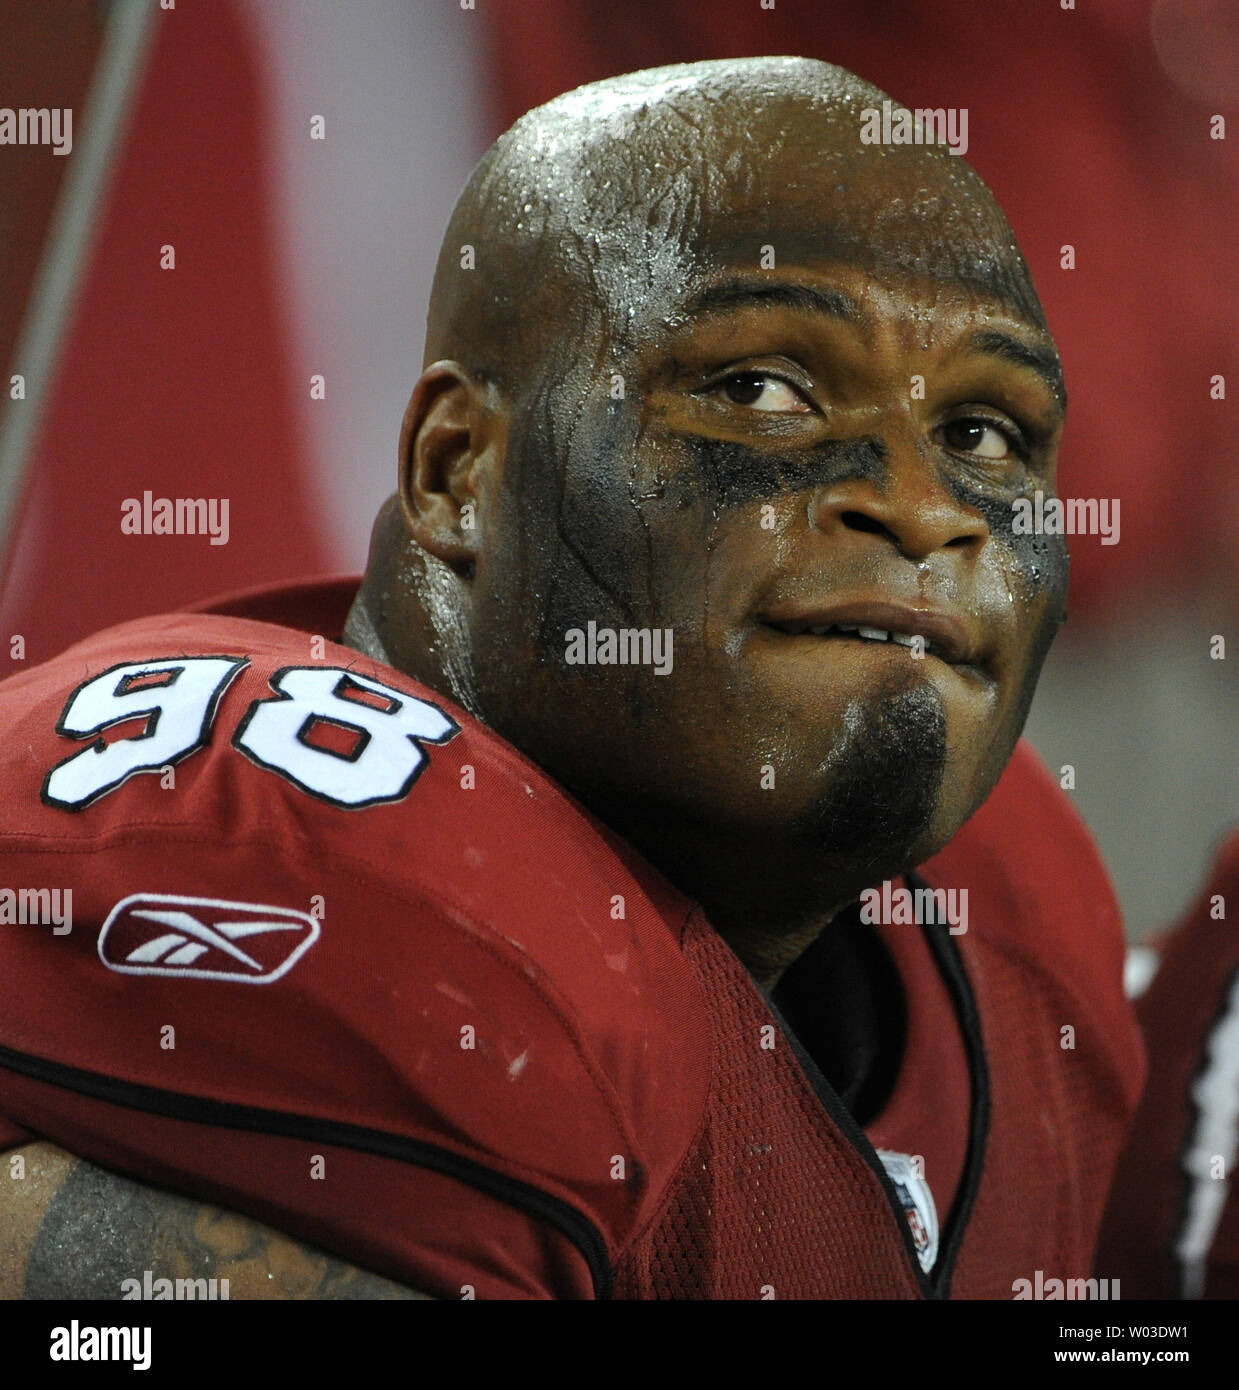 Arizona Cardinals tackle Gabe Watson looks up at the scoreboard in the last minutes of the Cardinals-Dallas Cowboys game at University of Phoenix Stadium in Glendale, AZ  December 25,2010.  The Cardinals defeated the Cowboys 27-26. UPI Photo/Art Foxall Stock Photo